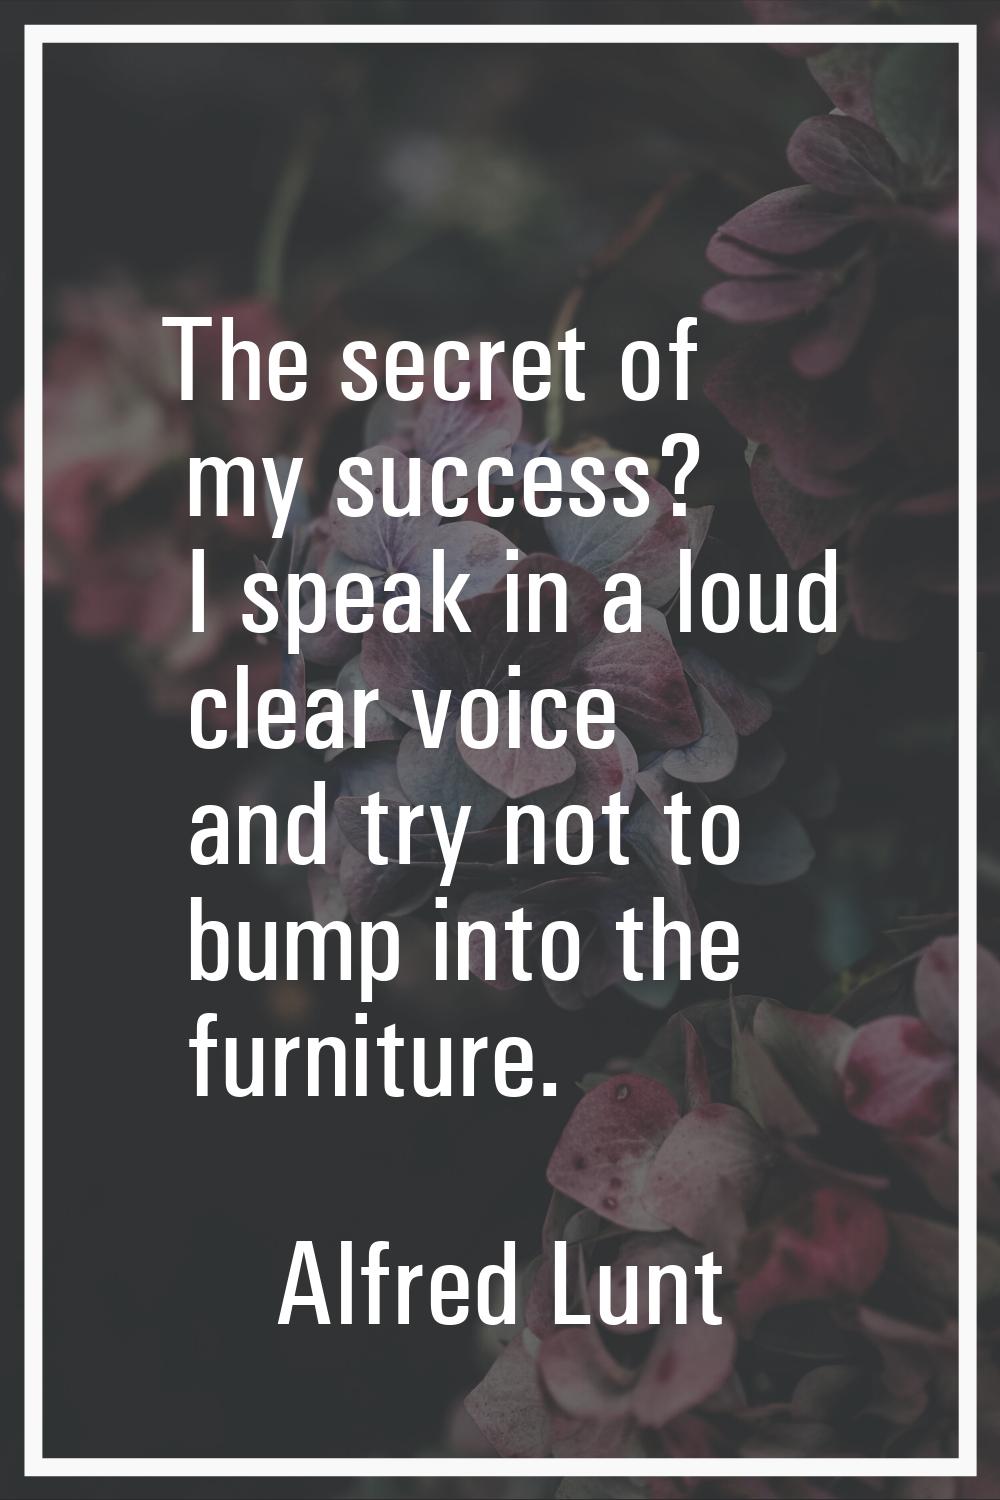 The secret of my success? I speak in a loud clear voice and try not to bump into the furniture.